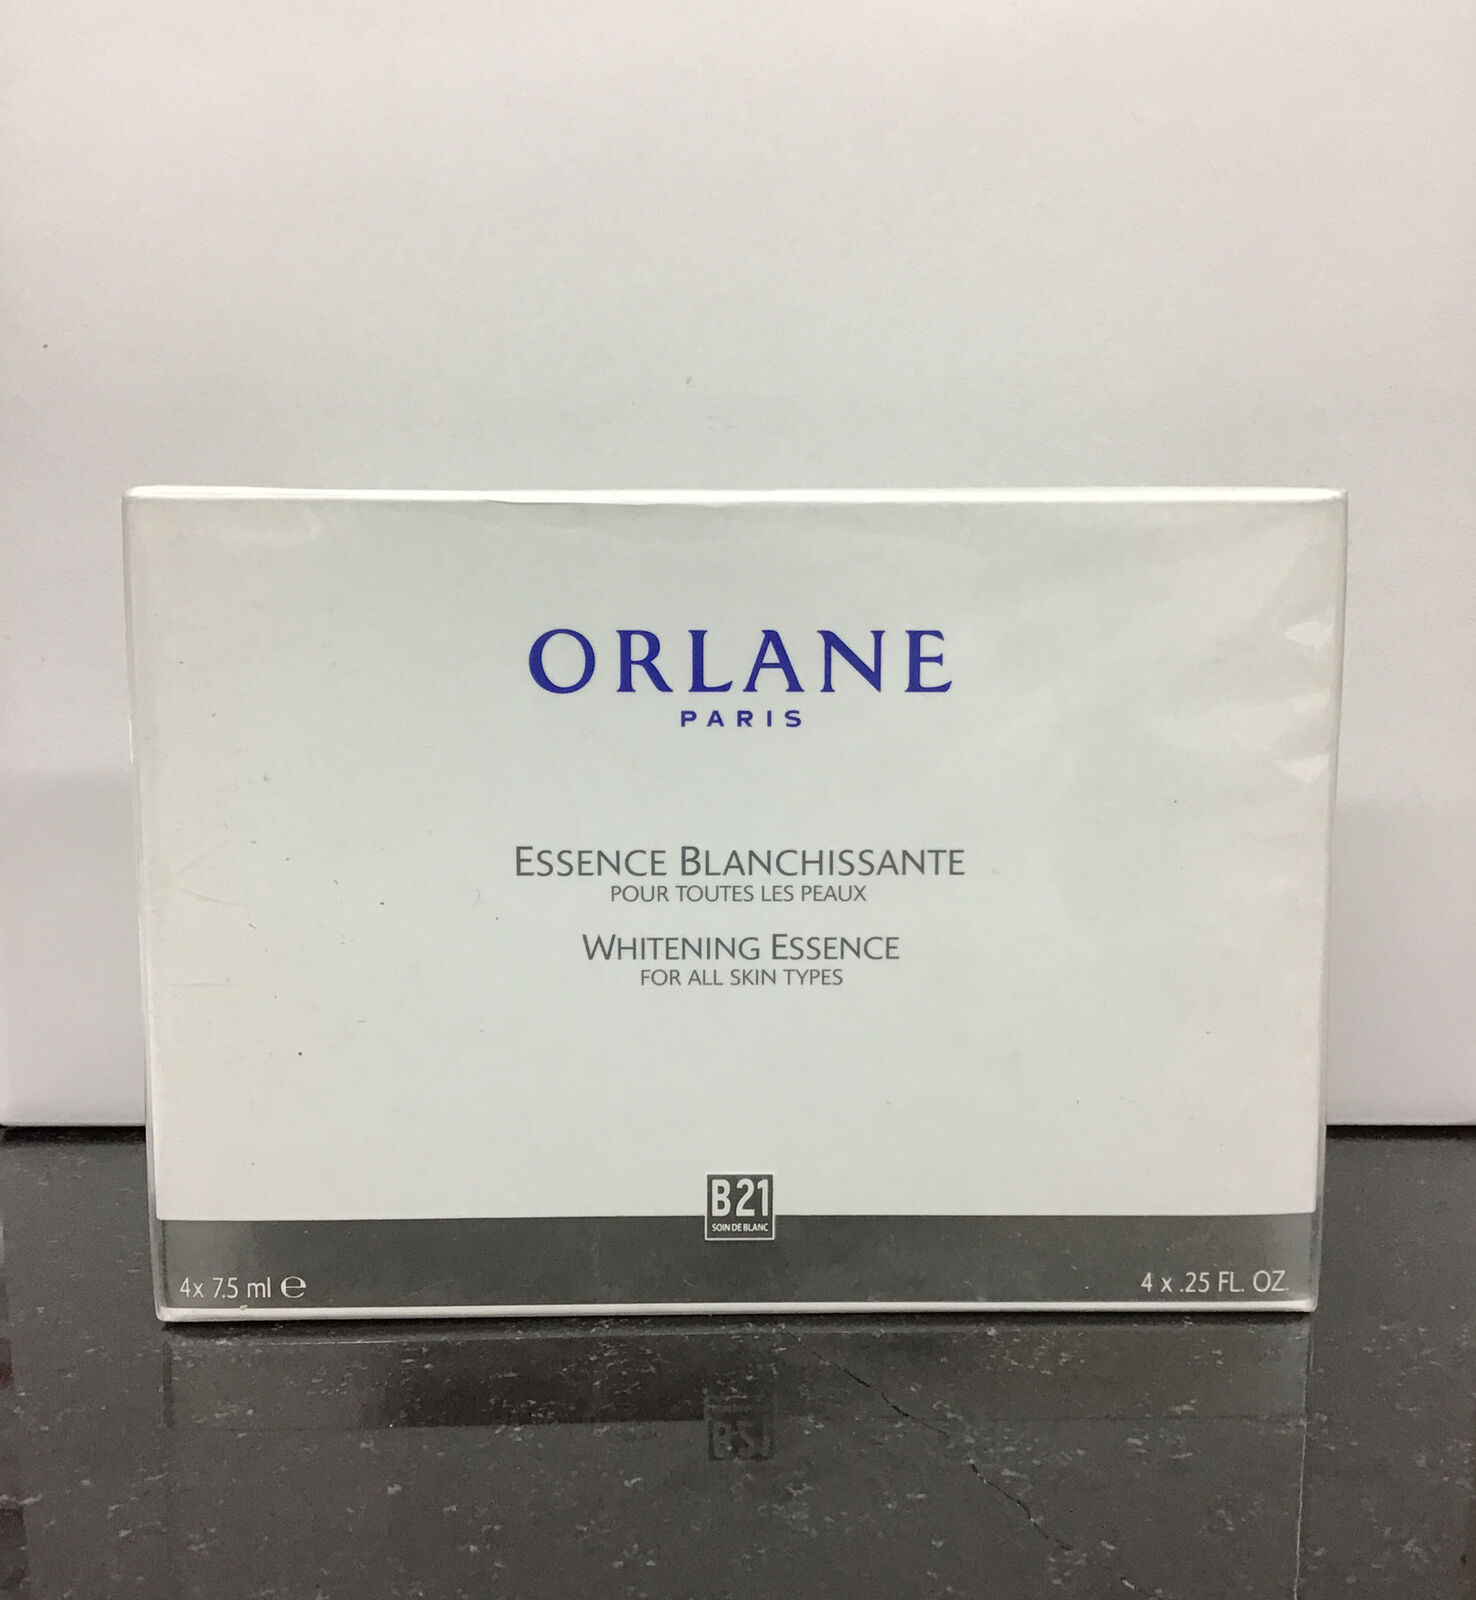 Orlane Withening Essence For all skin types 4 x .25 fl oz, As pictured .